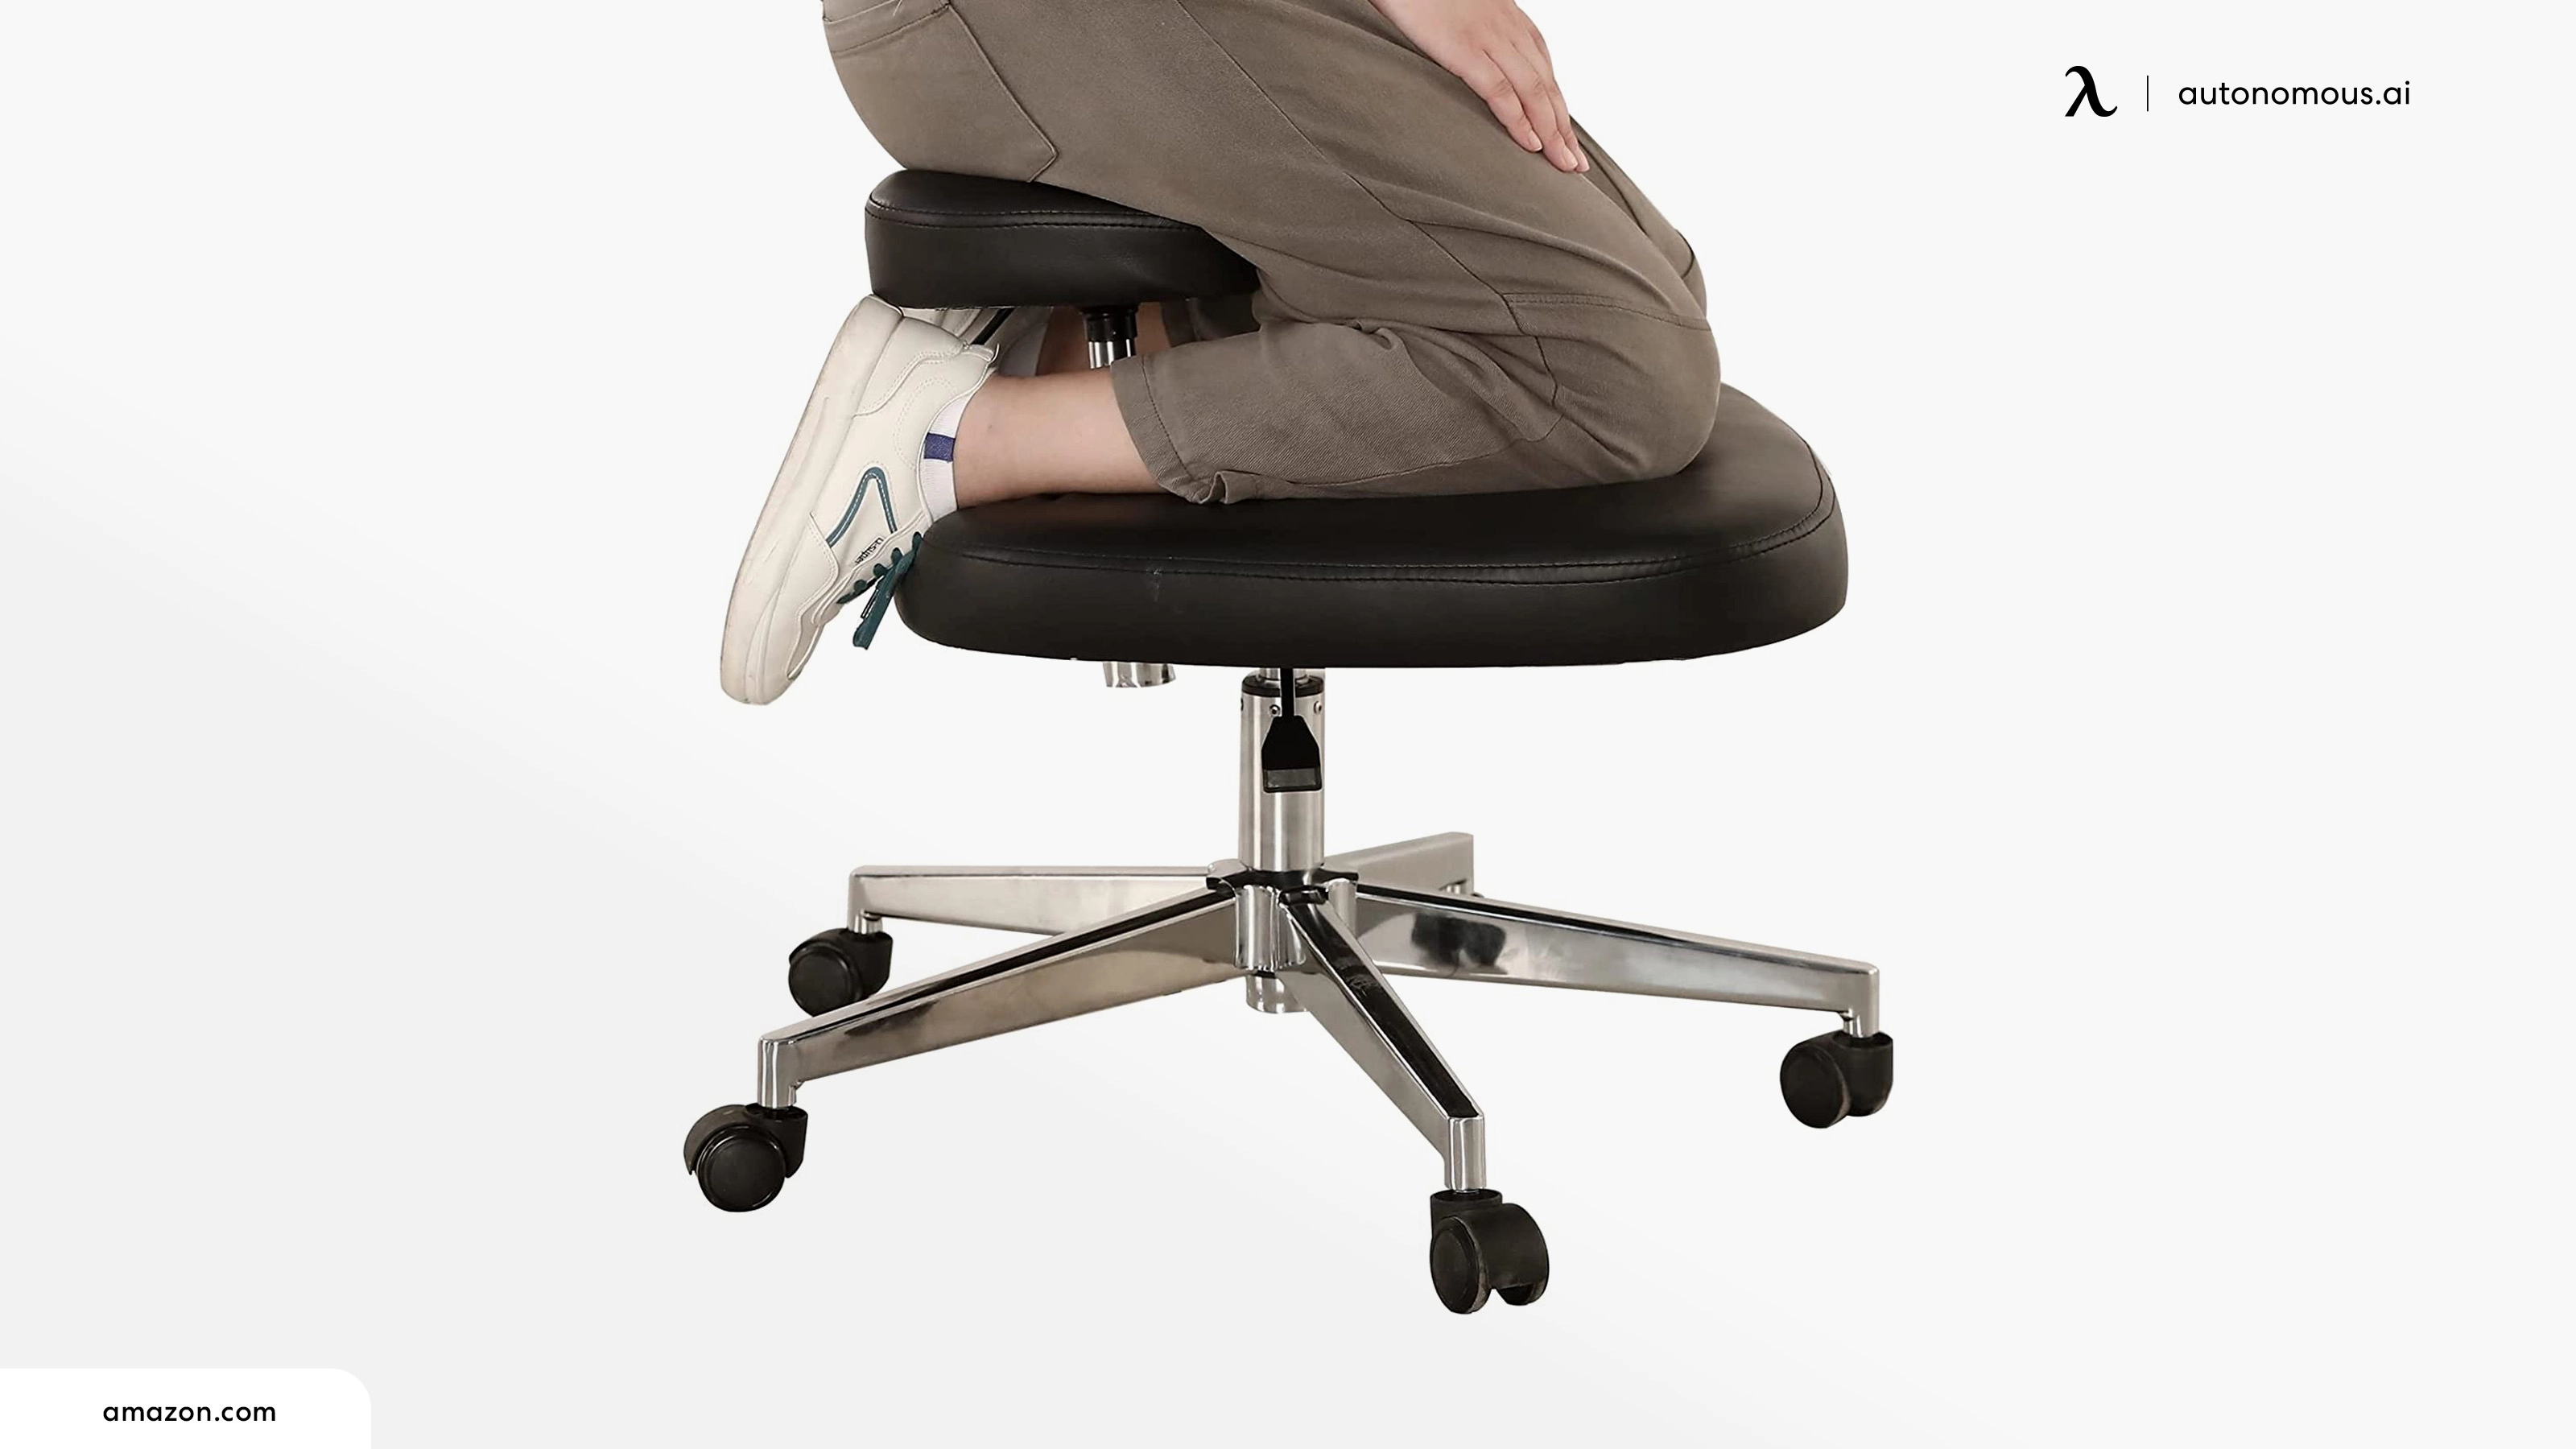 Tcowoy Ergonomic Cross Legged Chair for Office or Home